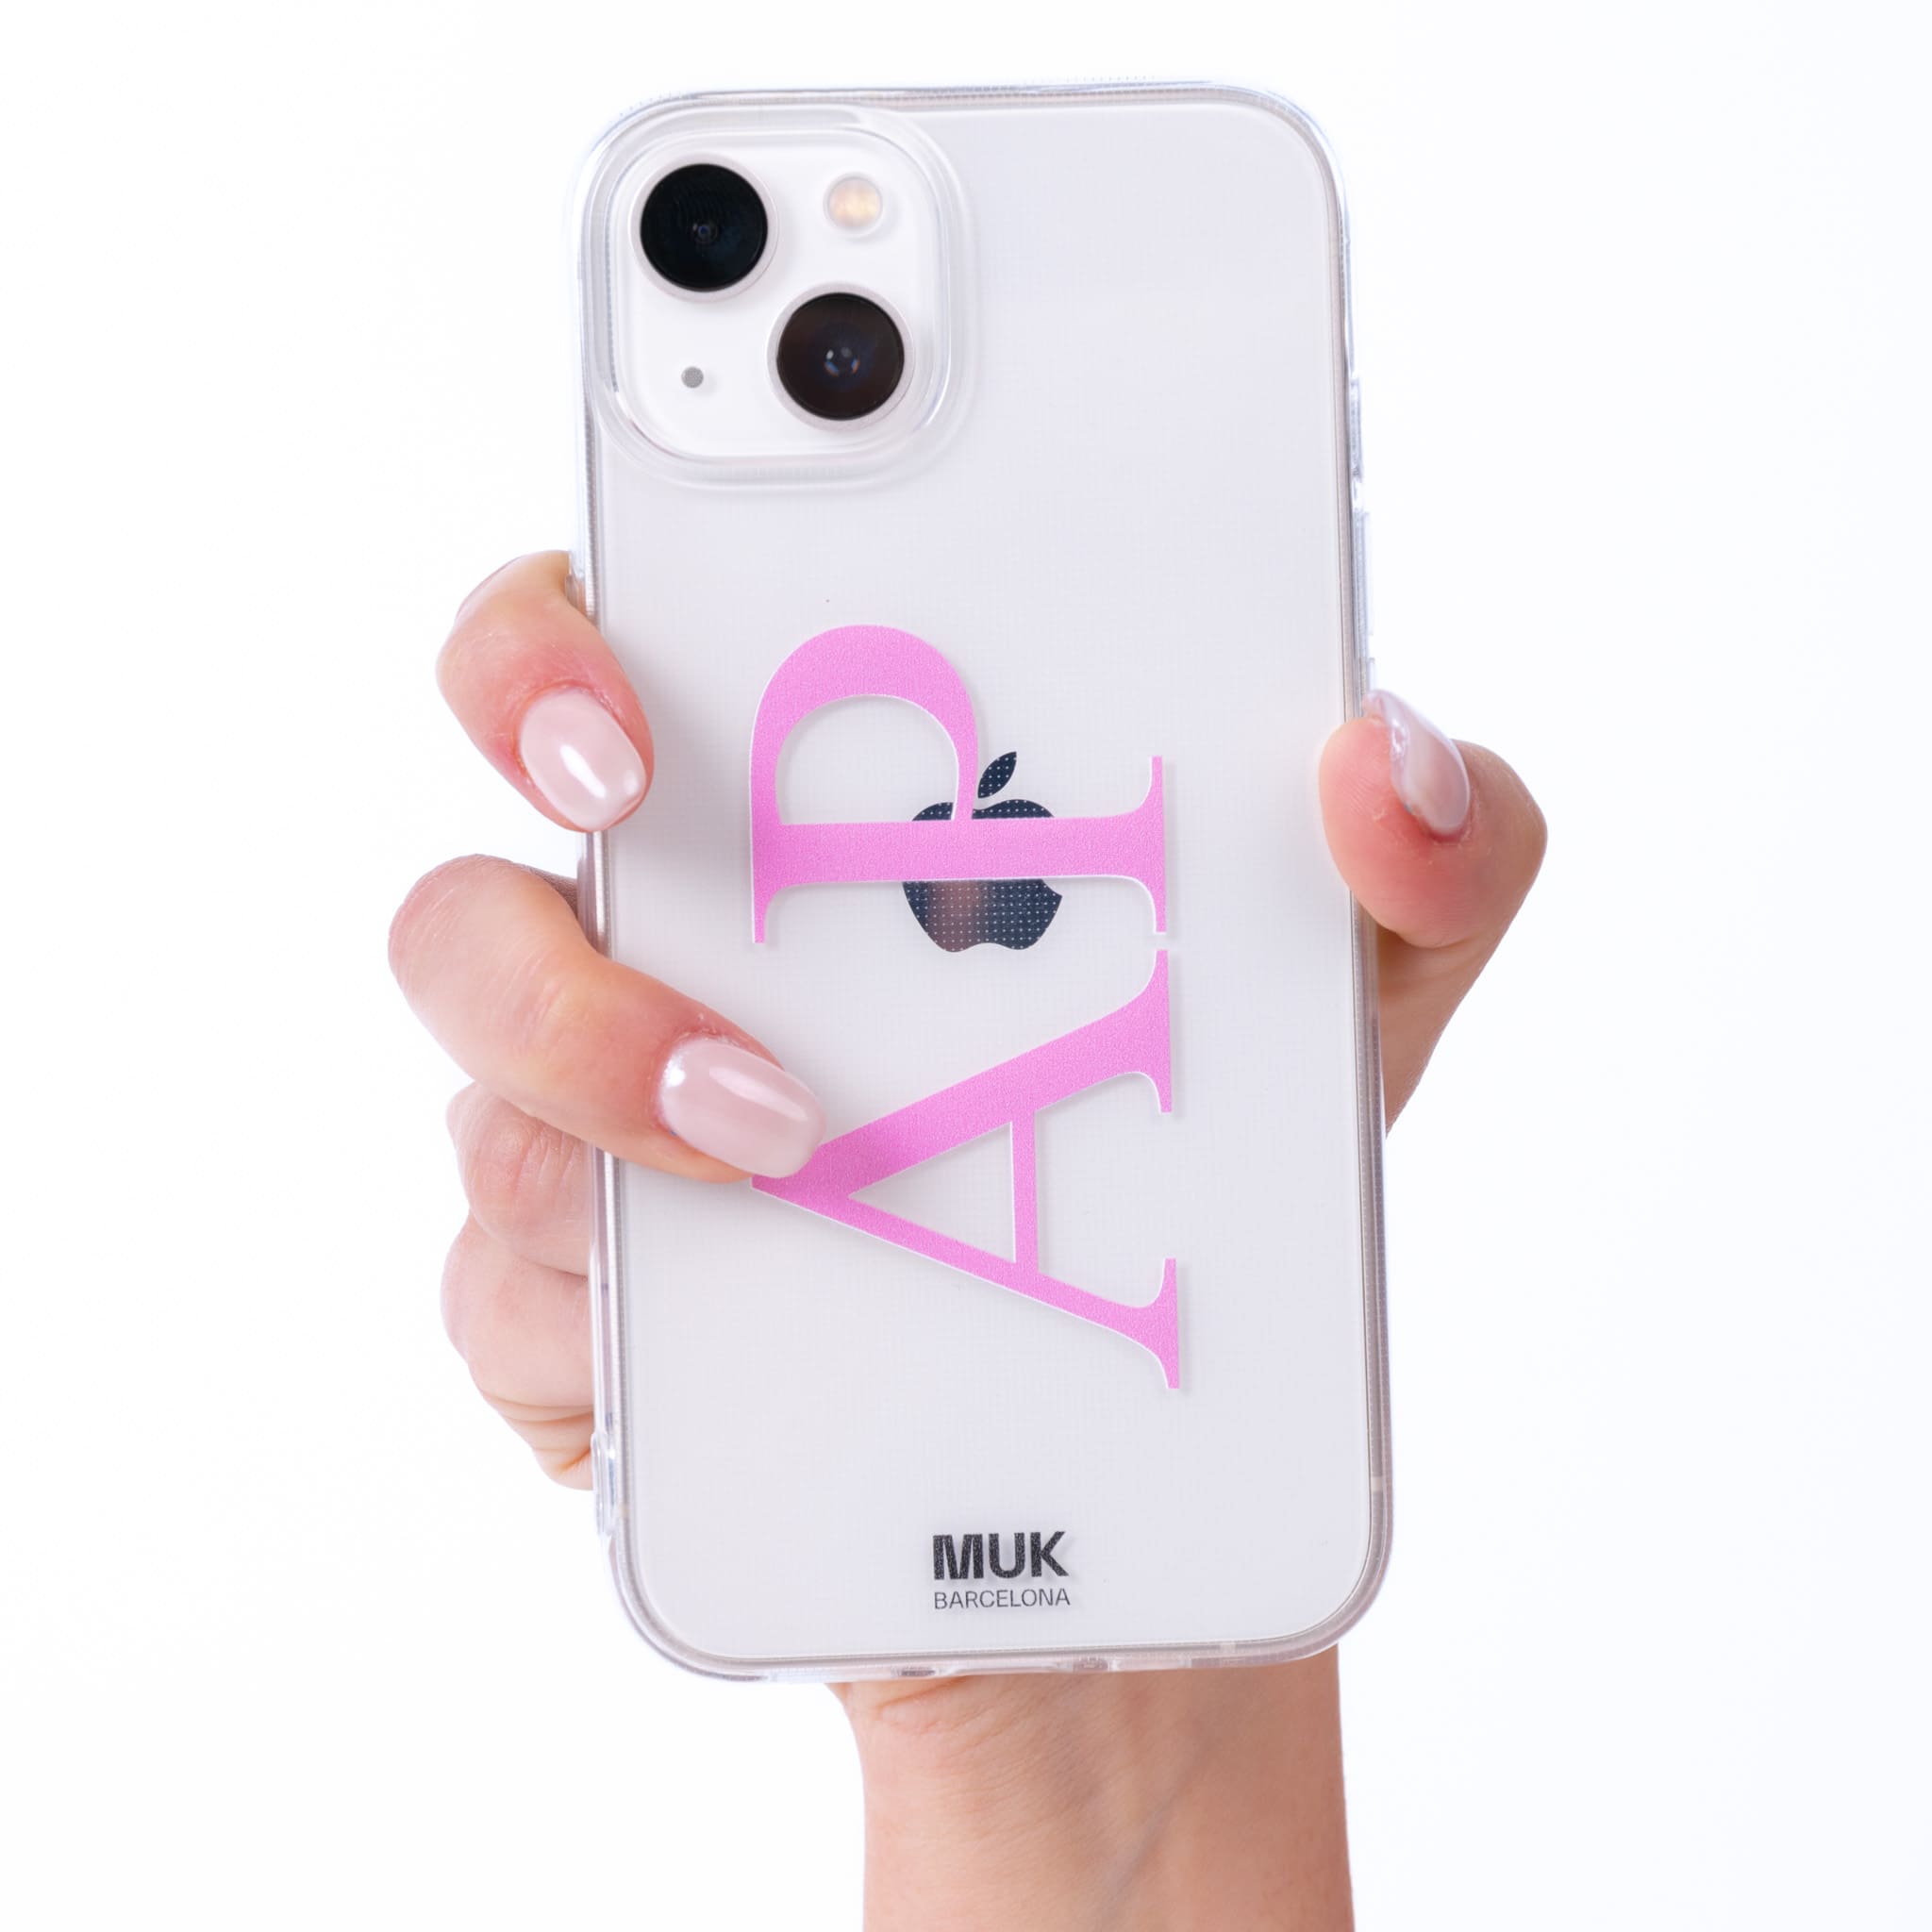 Personalized clear Phone Case with a maximum of 3 initials with an elegant typography design in 12 colors.
